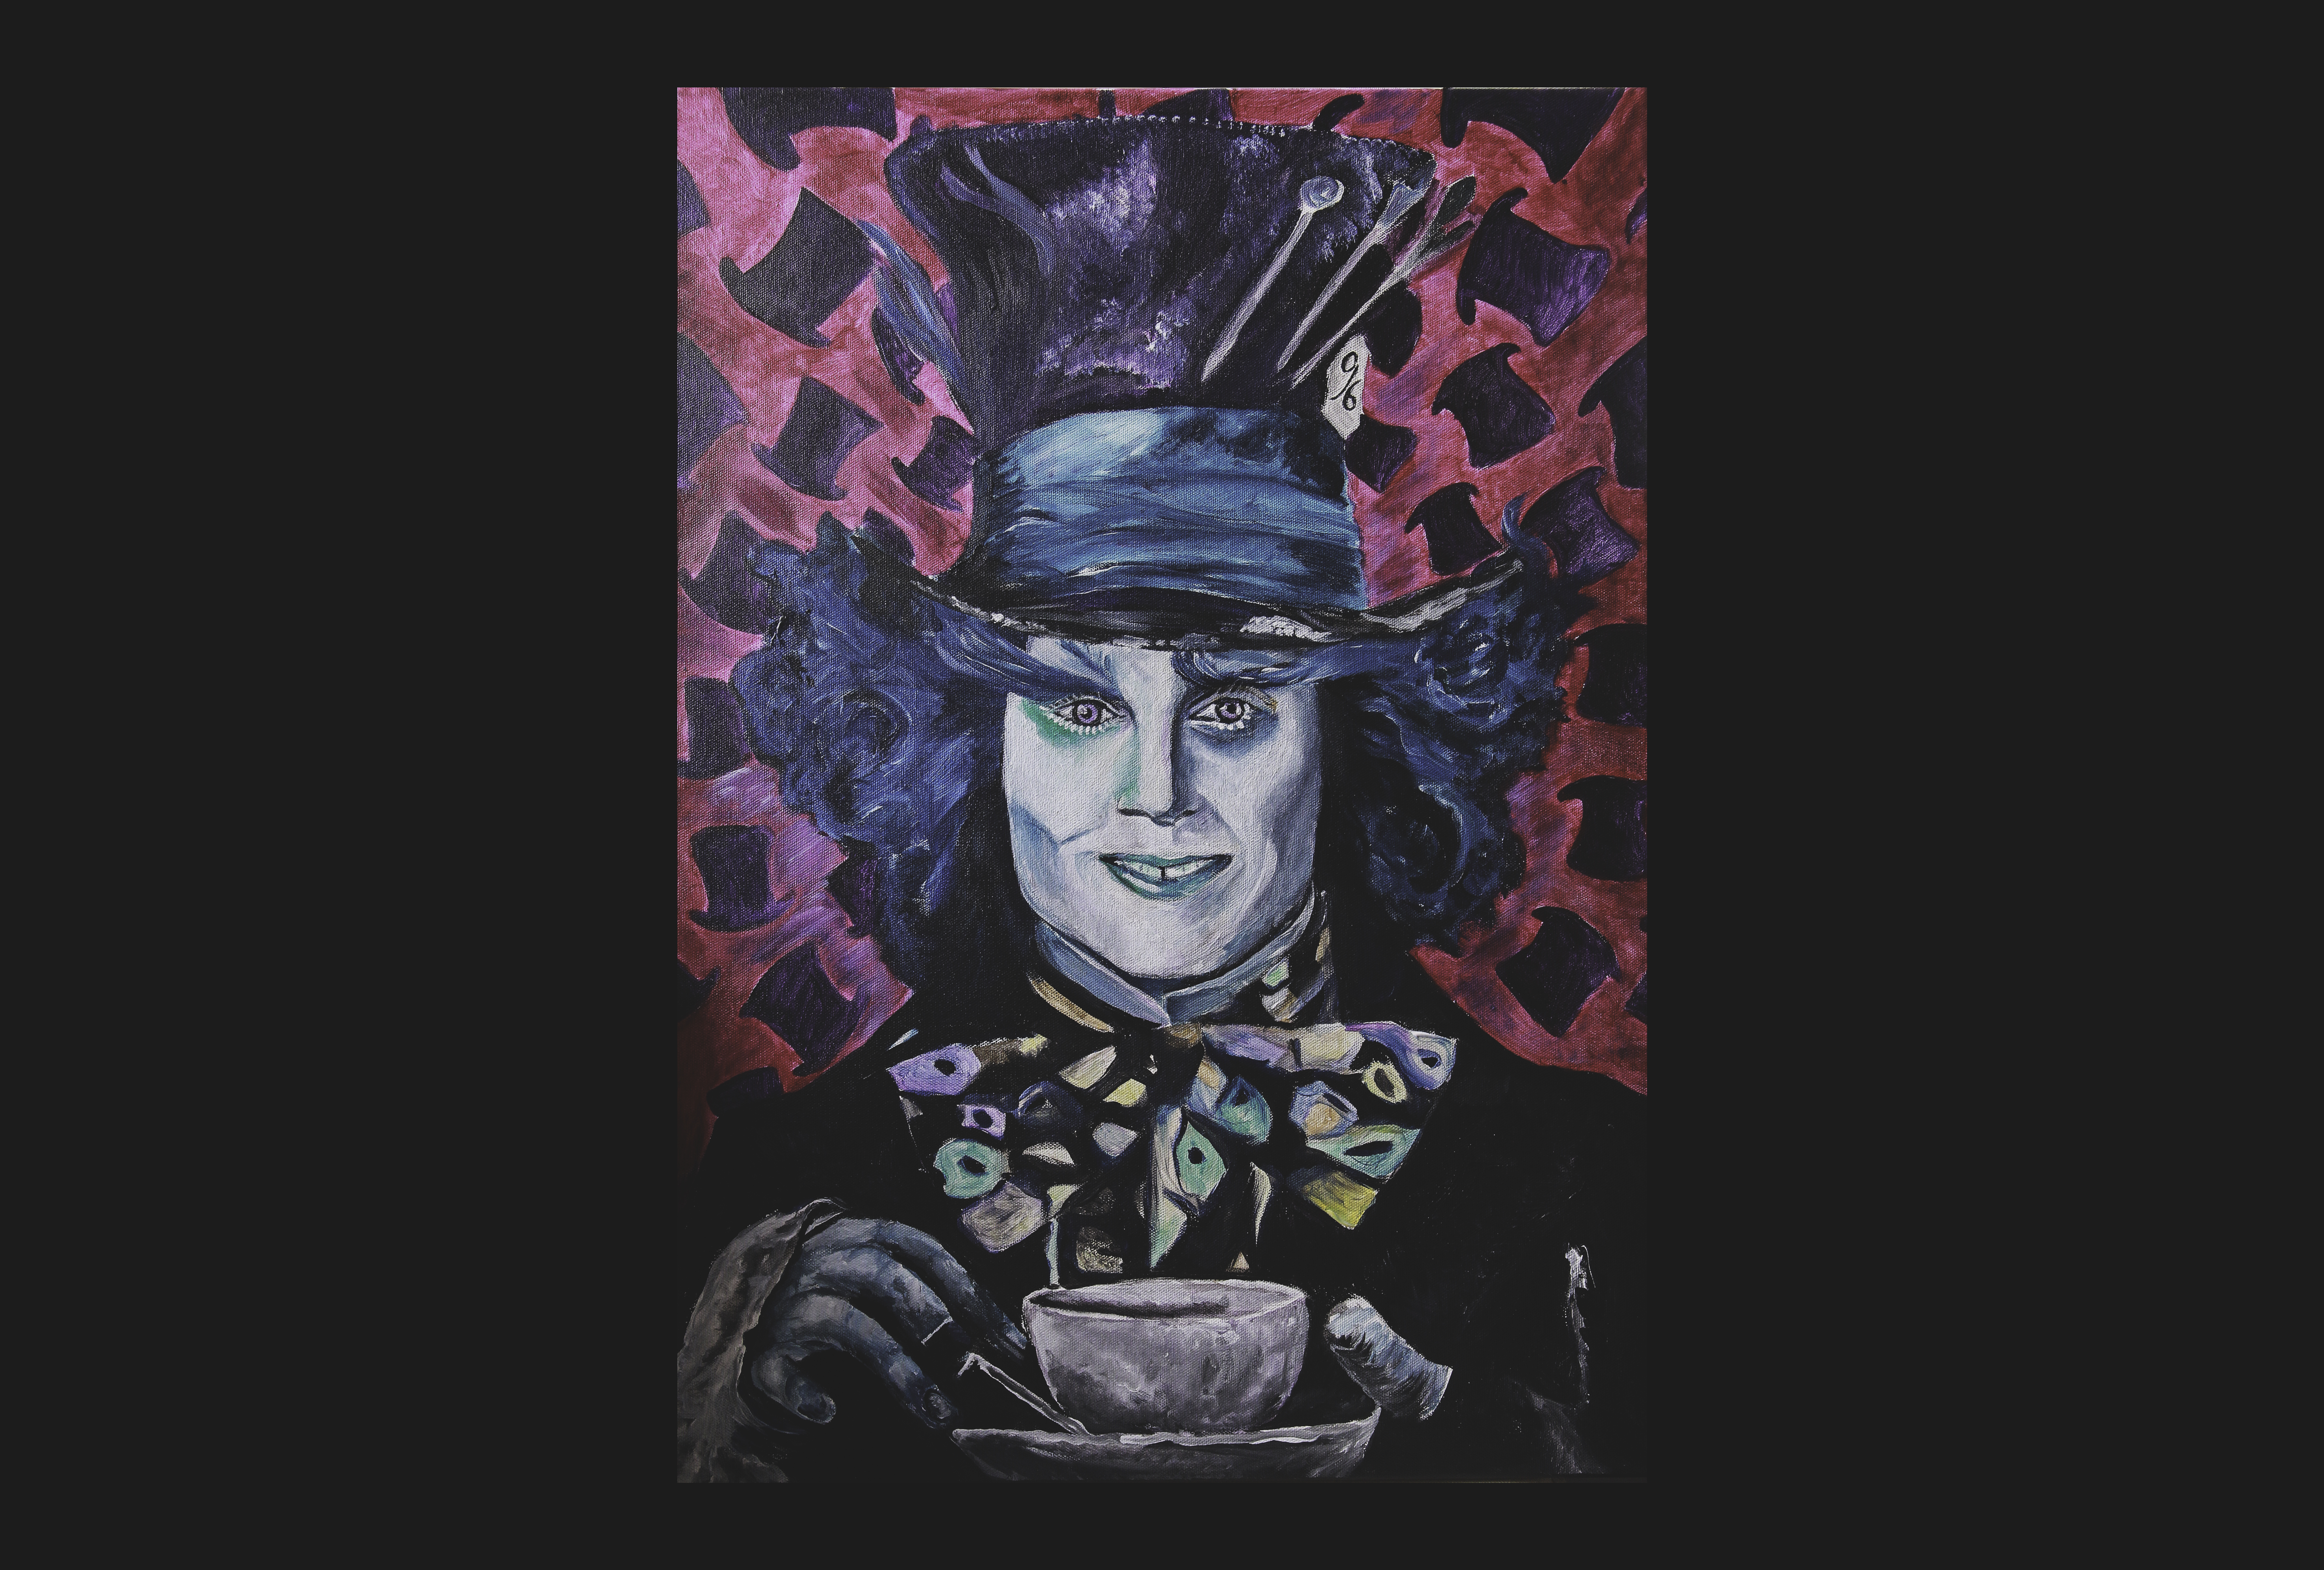 The Madhatter